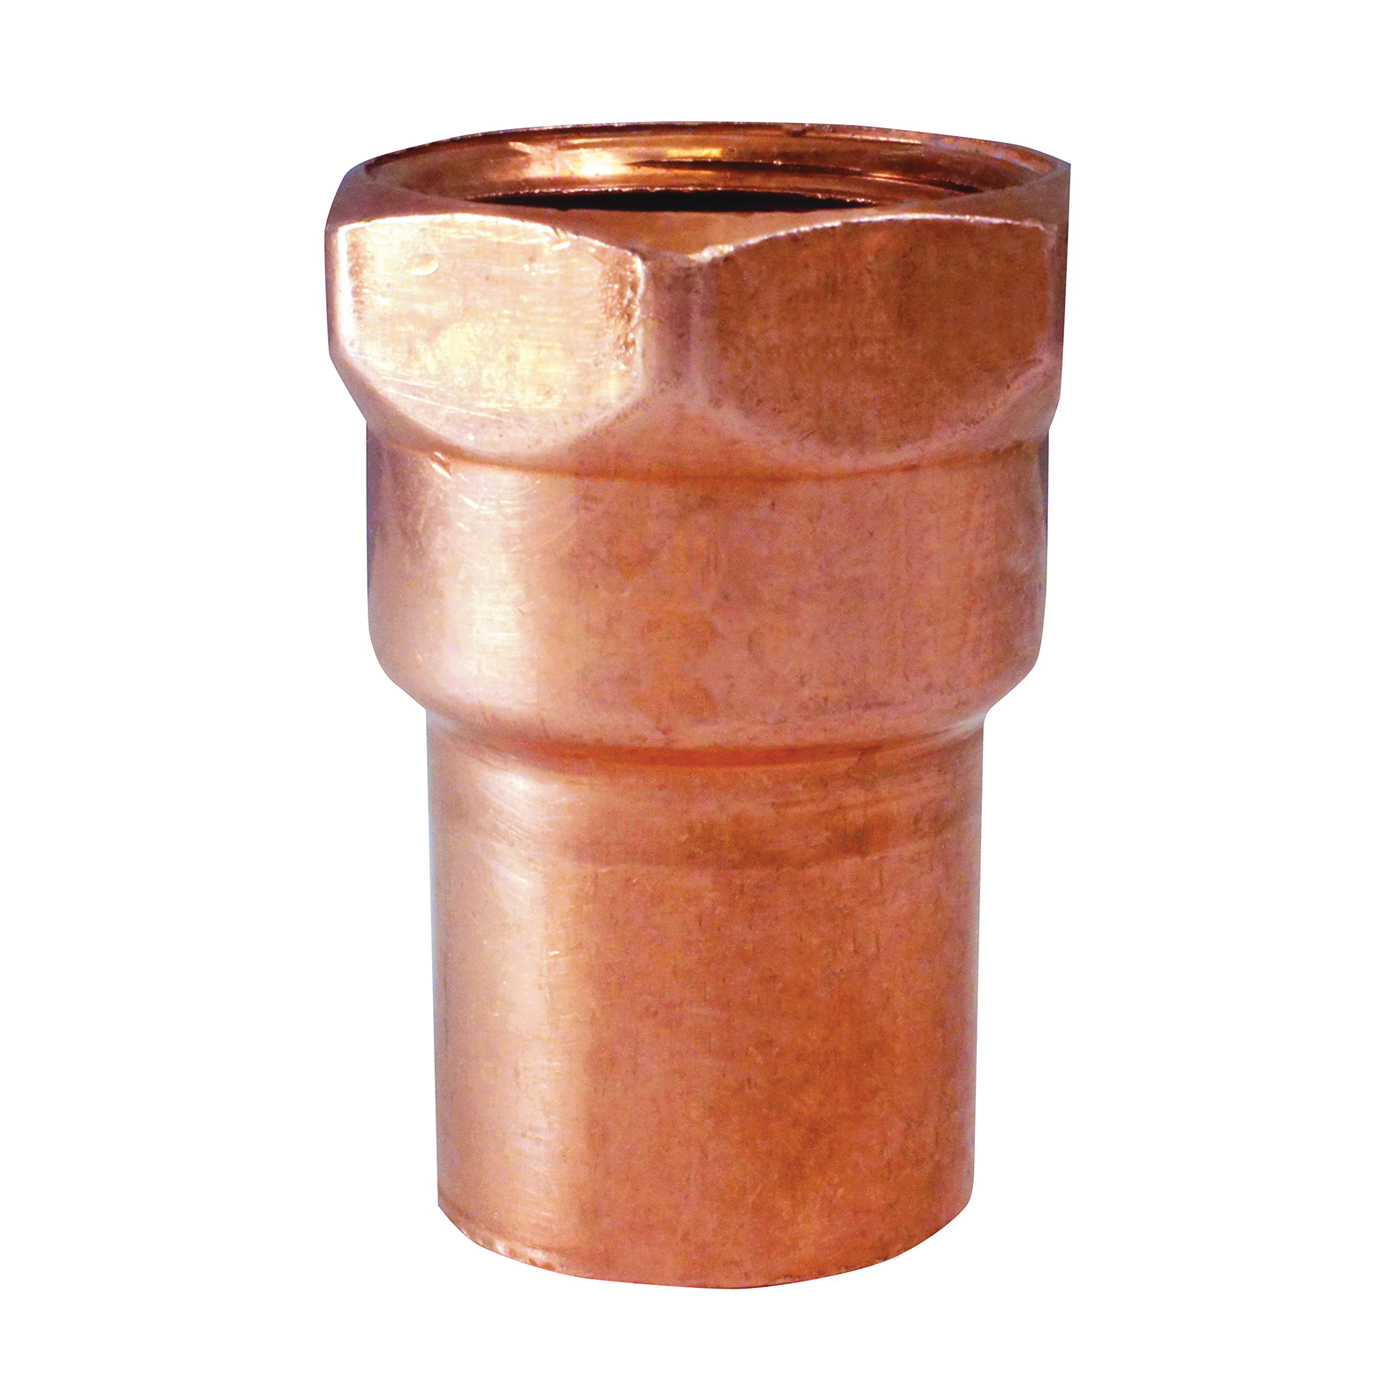 103R Series 10130138 Reducing Pipe Adapter, 1/2 x 1/4 in, Sweat x FIP, Copper